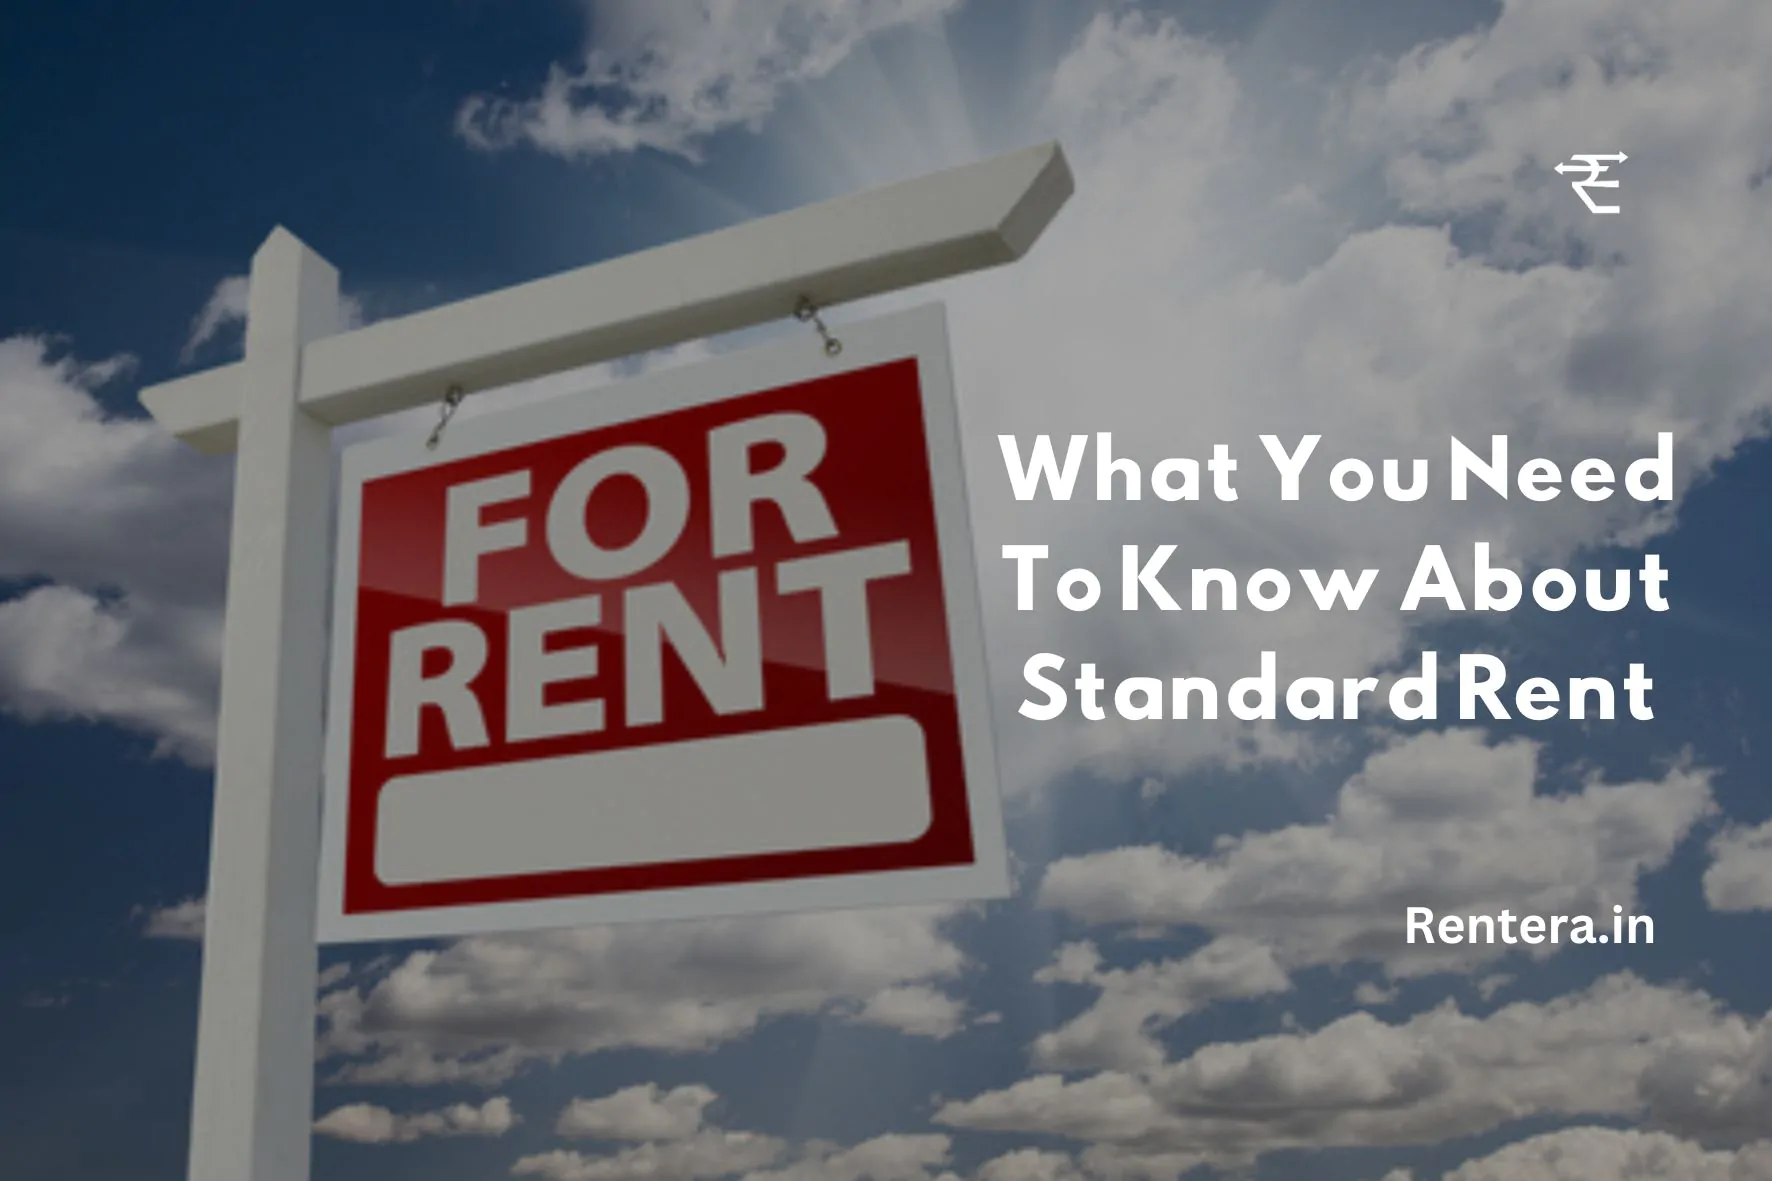 The Ultimate Guide: What You Need to Know About Standard Rent